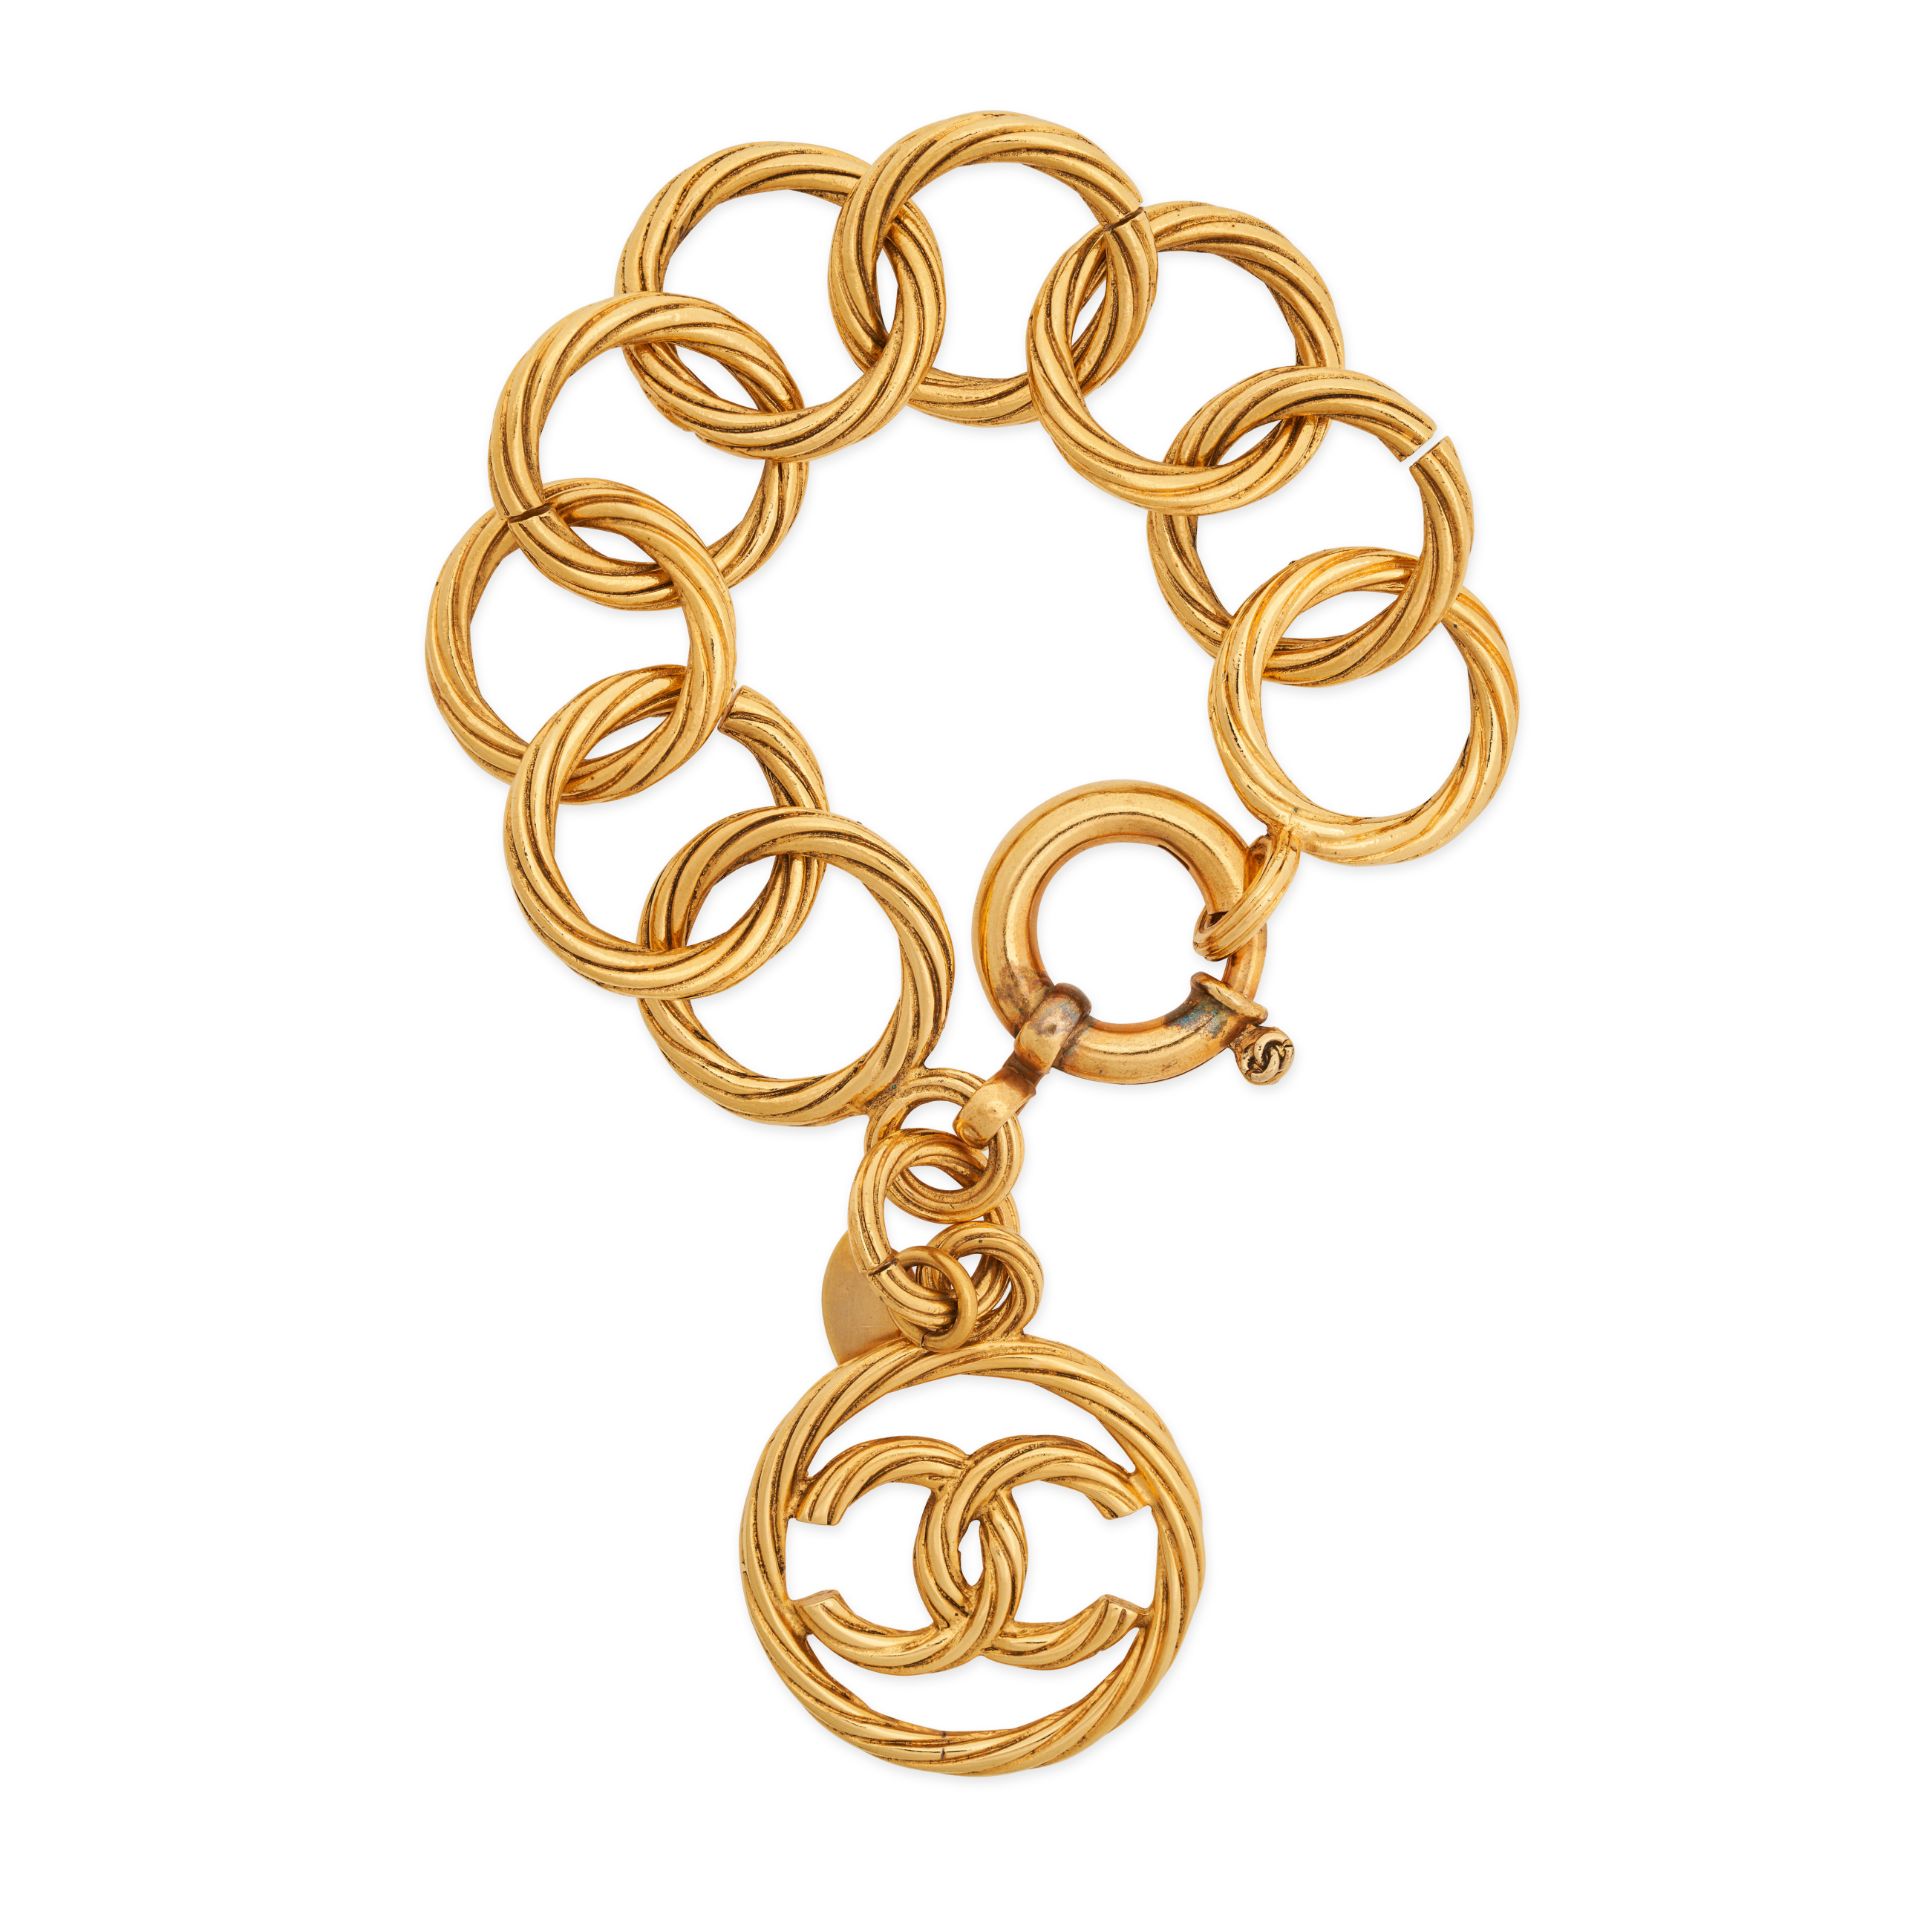 CHANEL, A VINTAGE CIRCLE LINK CHARM BRACELET in 24ct gold plated metal, comprising textured inter...